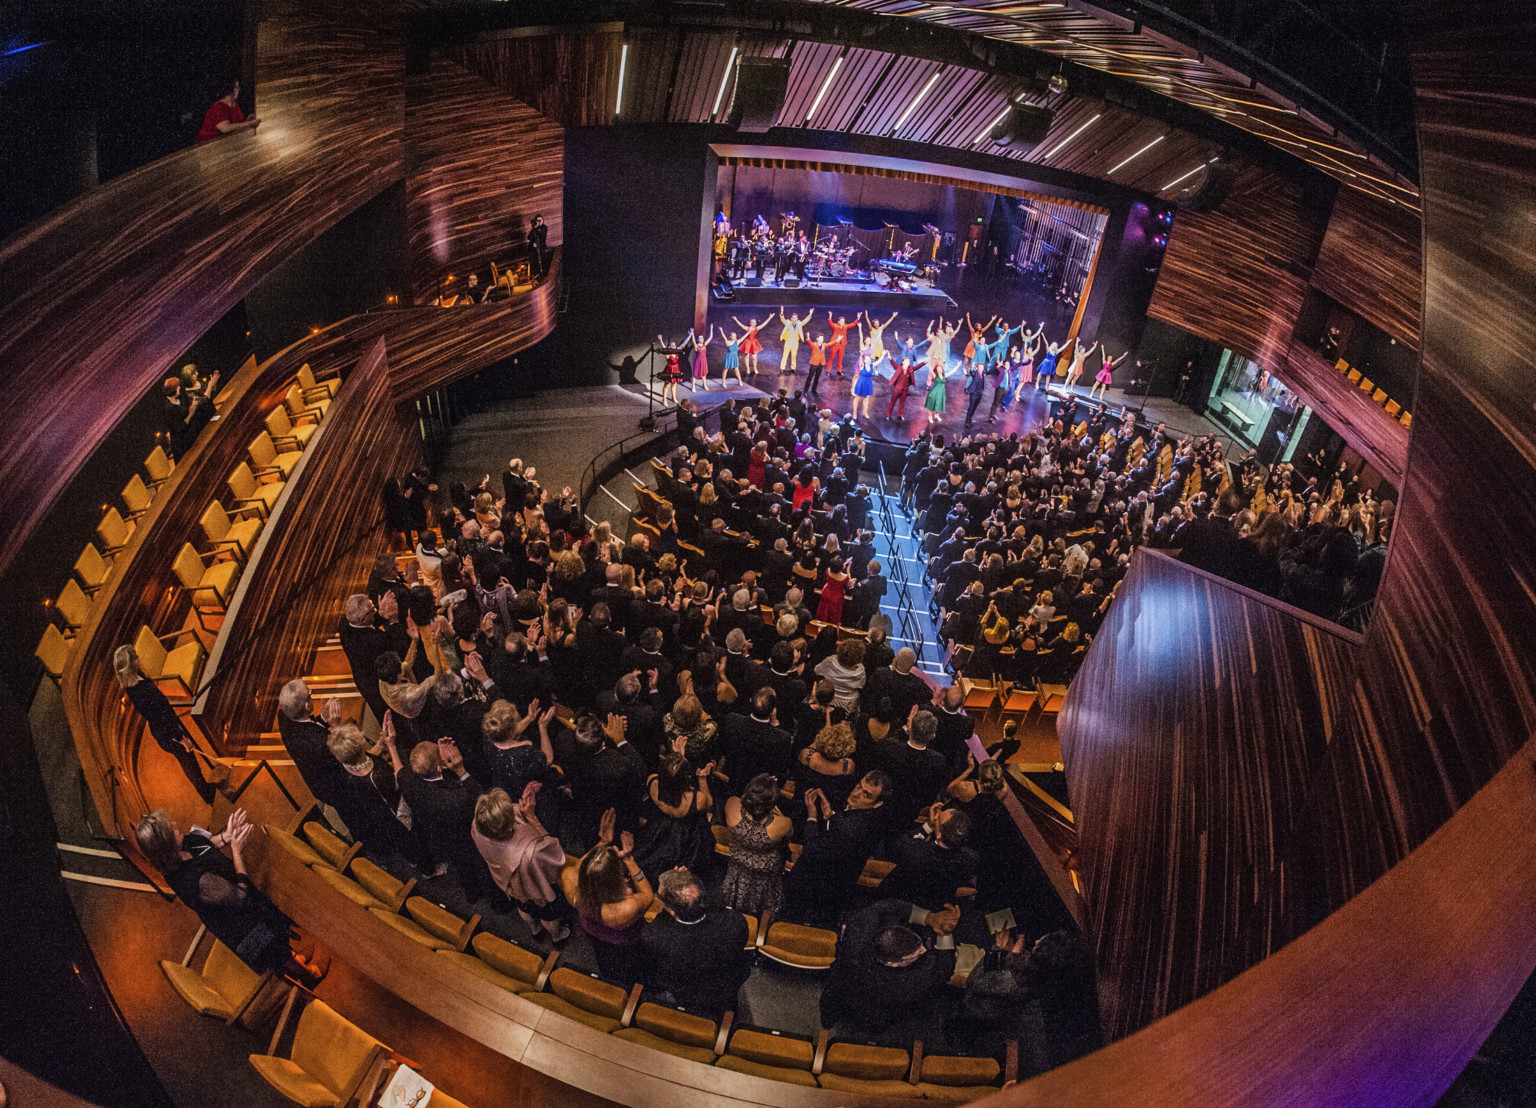 fisheye view of theater with audience and cast bowing on stage, surrounded by dark wood paneling and deep purple lights